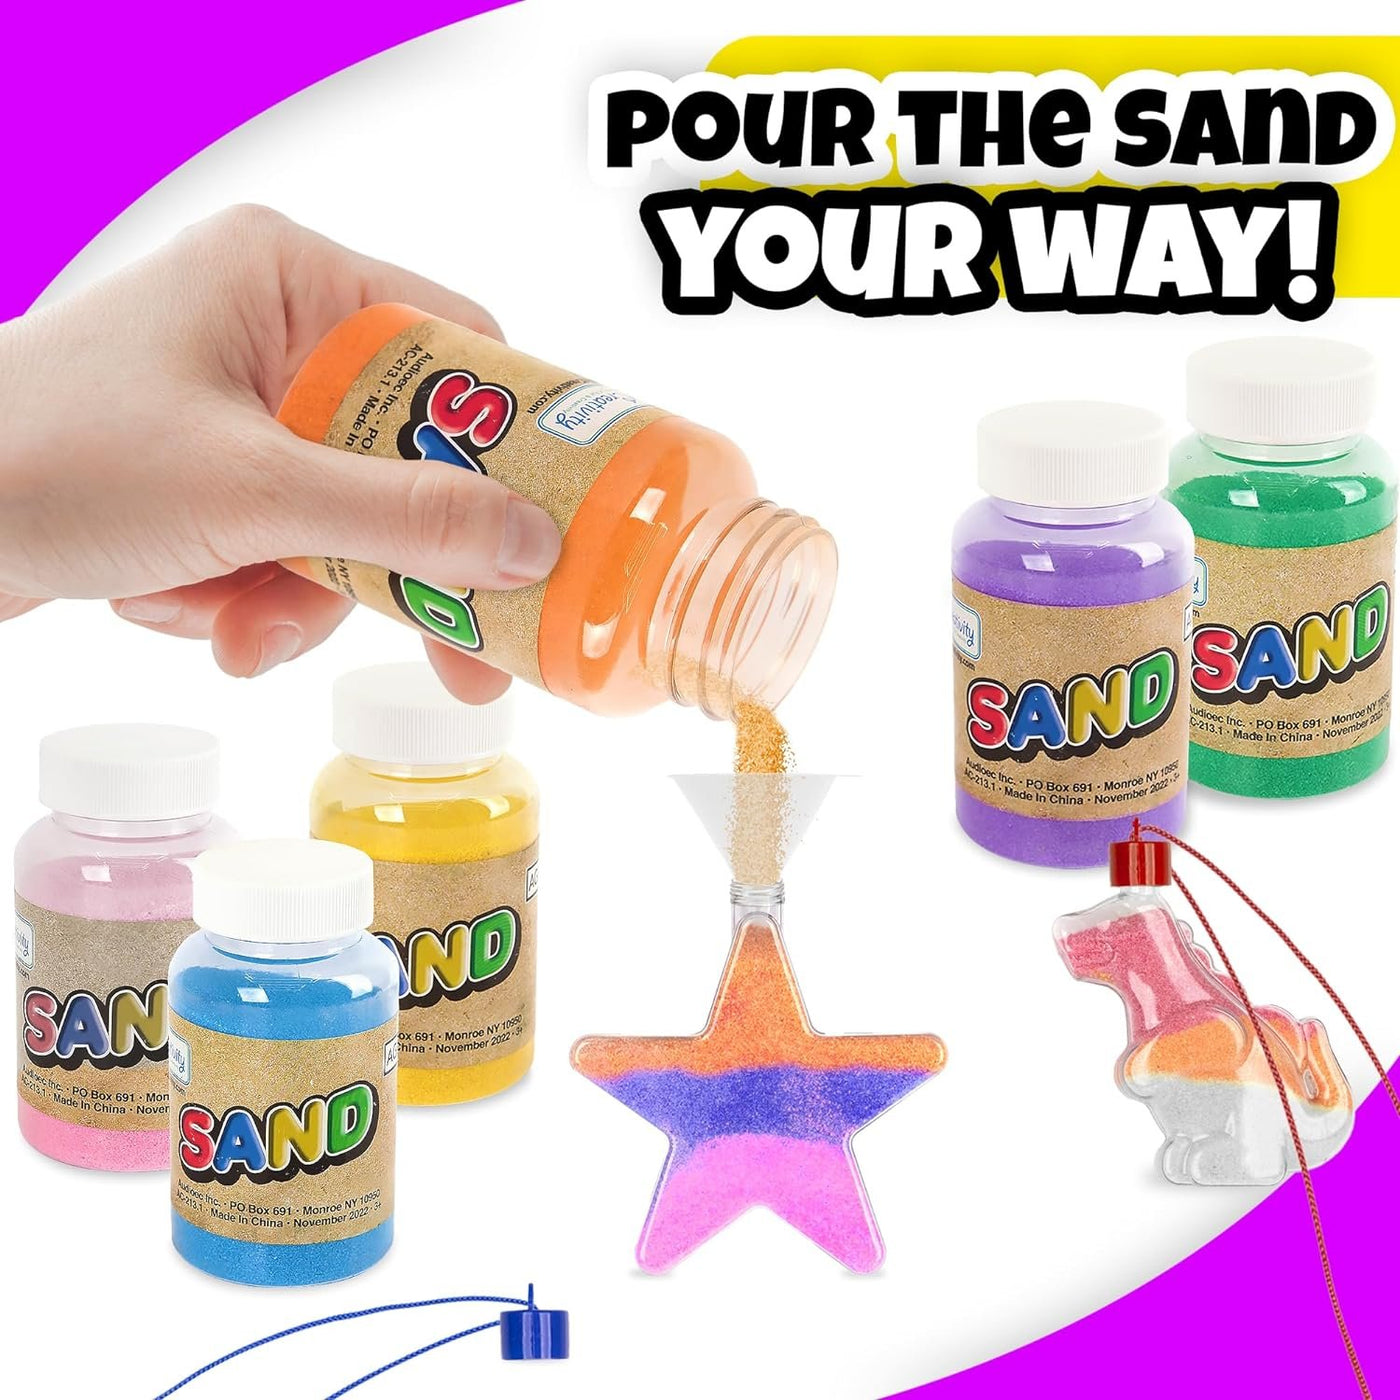 Sand Art Kits for Kids, 10 Colored Kids' Sand Art Kit with 10